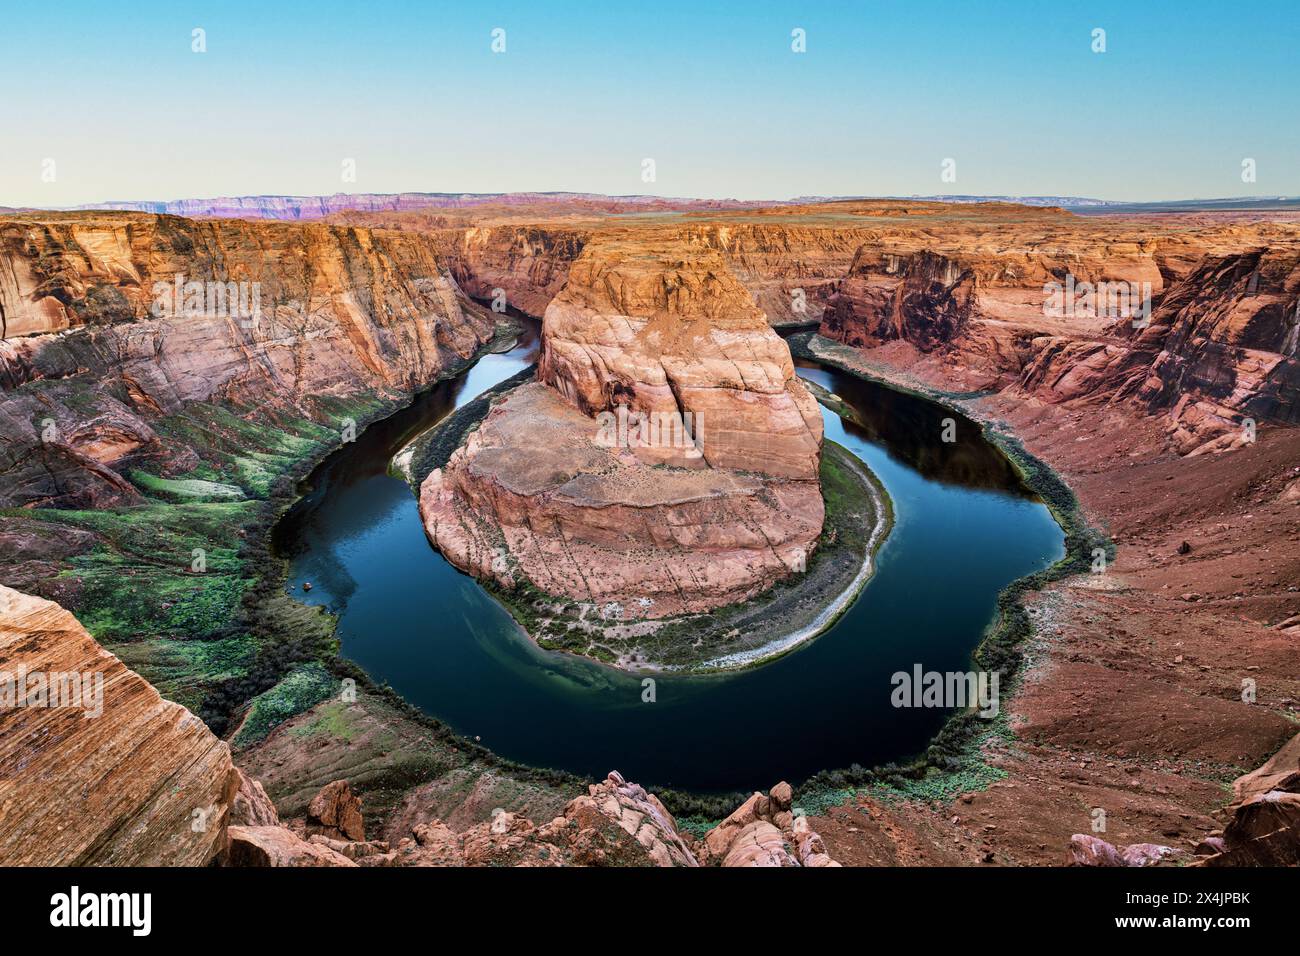 Super panorama of Horseshoe Bend in Page Arizona shows the pink inversion layer and the dramatic horseshoe shape from which the Colorado River flows. Stock Photo